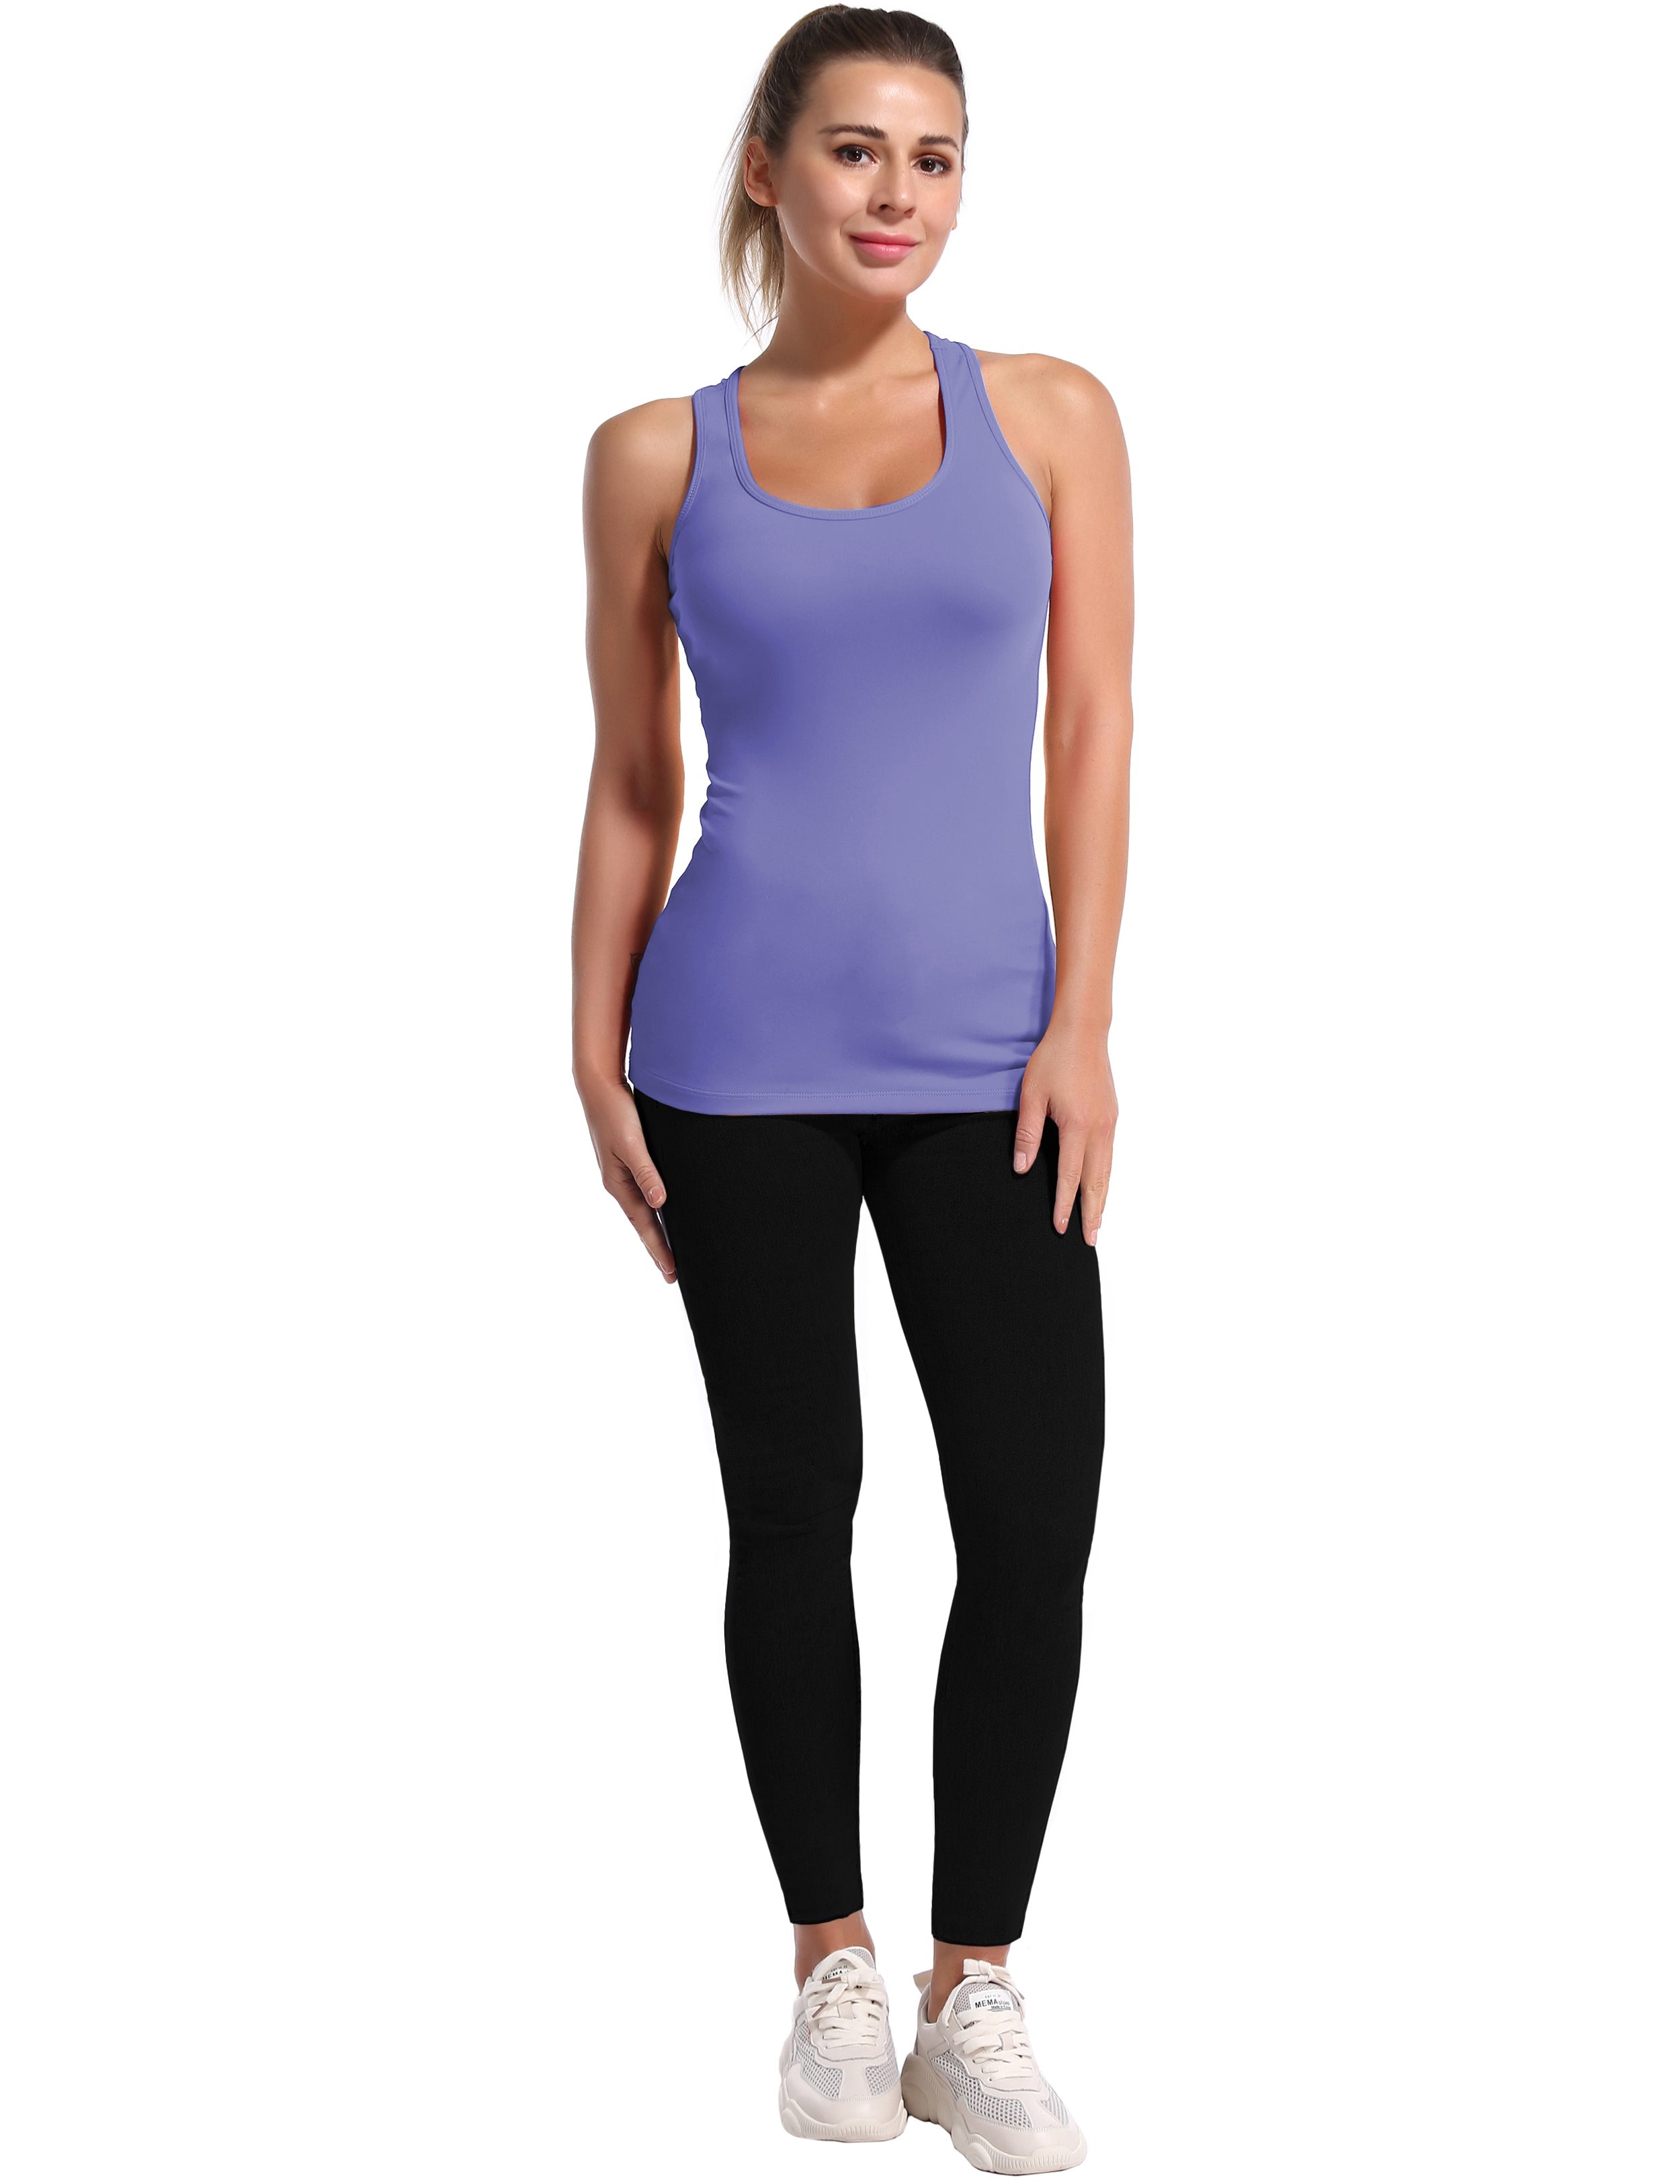 Racerback Athletic Tank Tops lavender 92%Nylon/8%Spandex(Cotton Soft) Designed for Golf Tight Fit So buttery soft, it feels weightless Sweat-wicking Four-way stretch Breathable Contours your body Sits below the waistband for moderate, everyday coverage